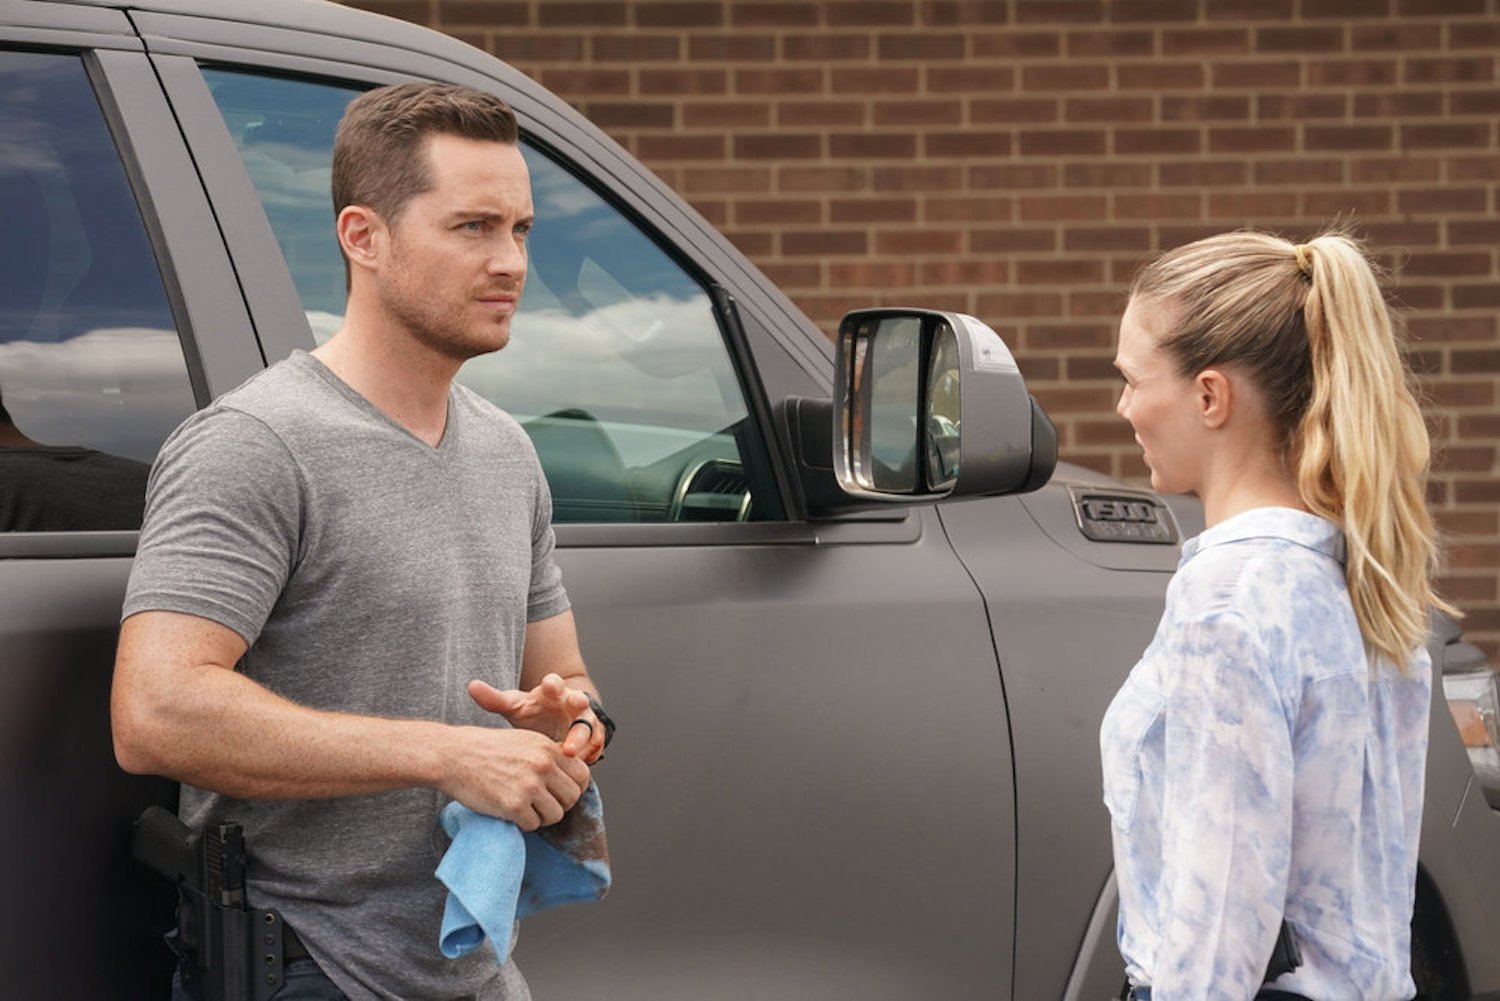 Jay Halstead and Hailey Upton in 'Chicago P.D.' Season 10 Episode 3